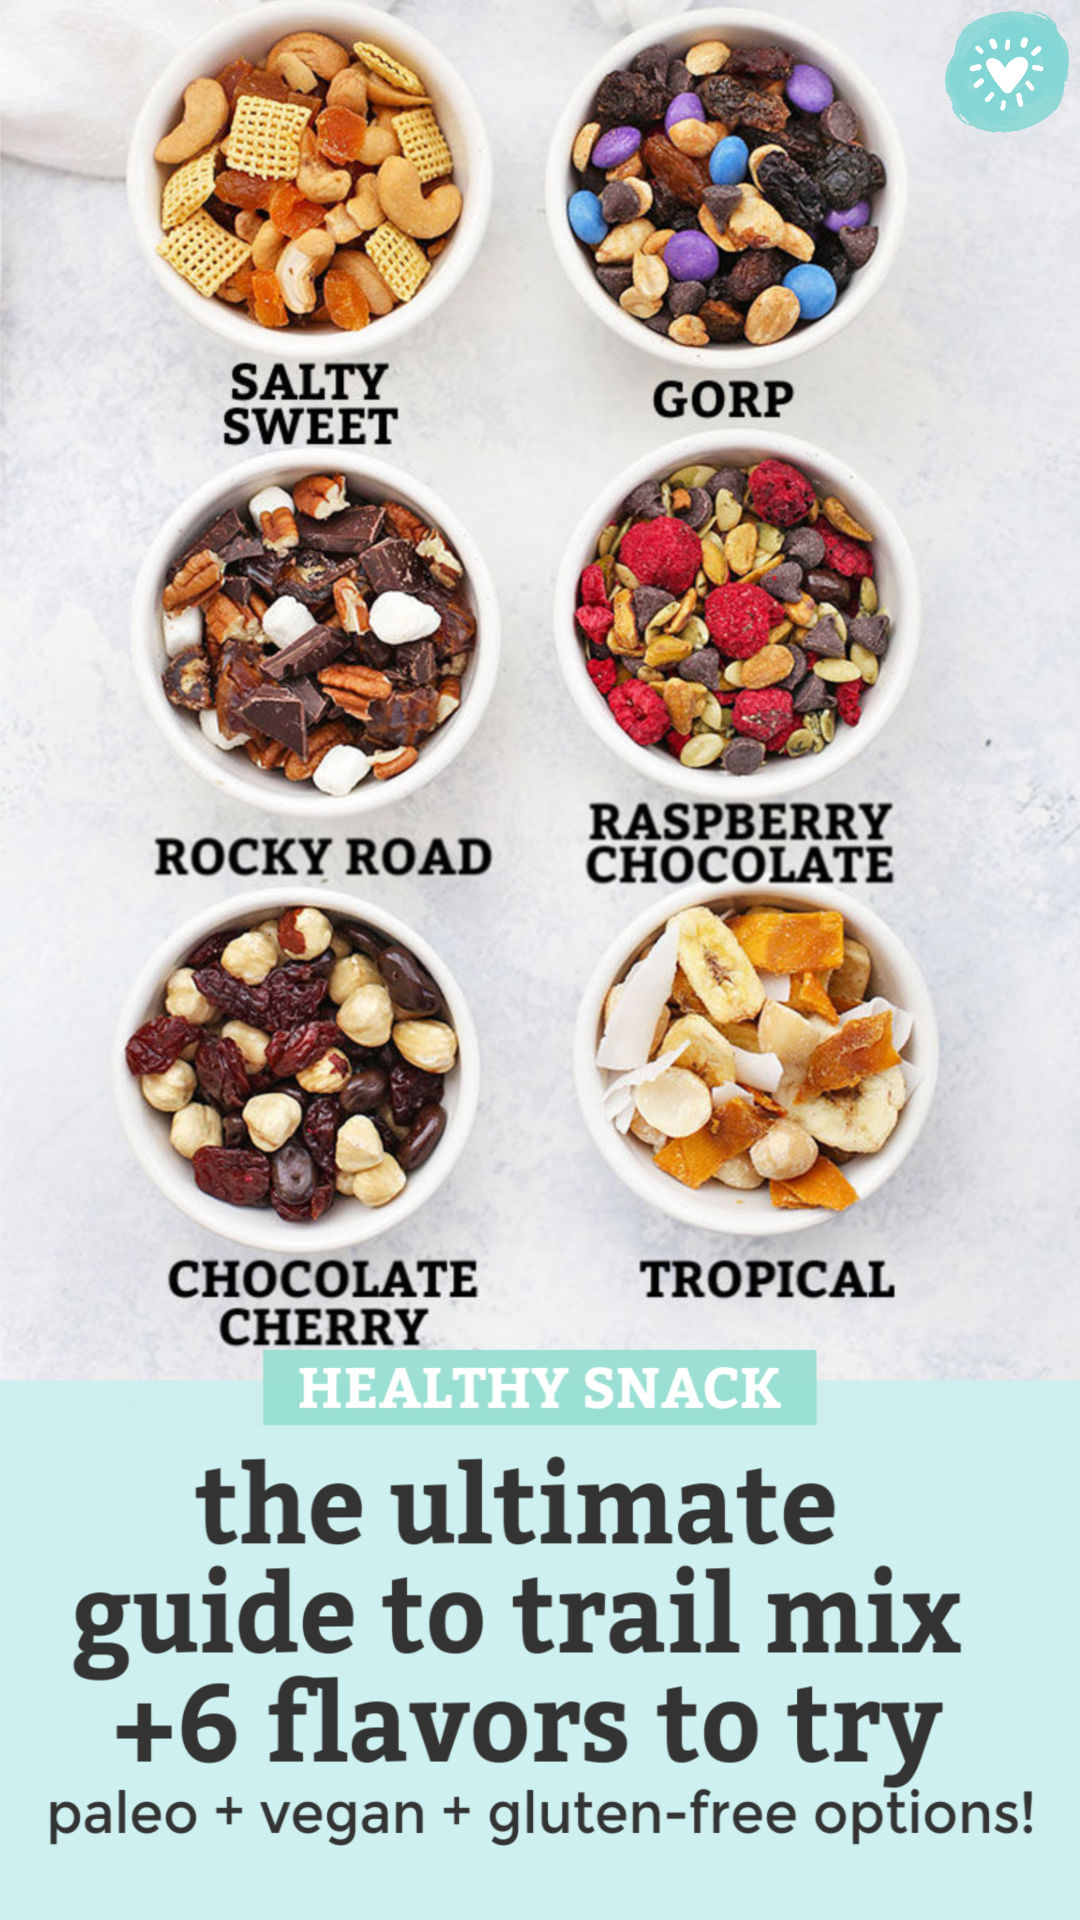 How to Make the BEST Trail Mix - Try this DIY Trail Mix Bar to make a week of healthy snacks in no time with these yummy trail mix ideas! Try our favorite flavor combinations or create your own. Gluten free, vegan, paleo, and Whole30 options! // Paleo snack // Trail Mix // Gluten free snack // Vegan snack #trailmix #glutenfree #vegan #paleo #snack #healthysnack